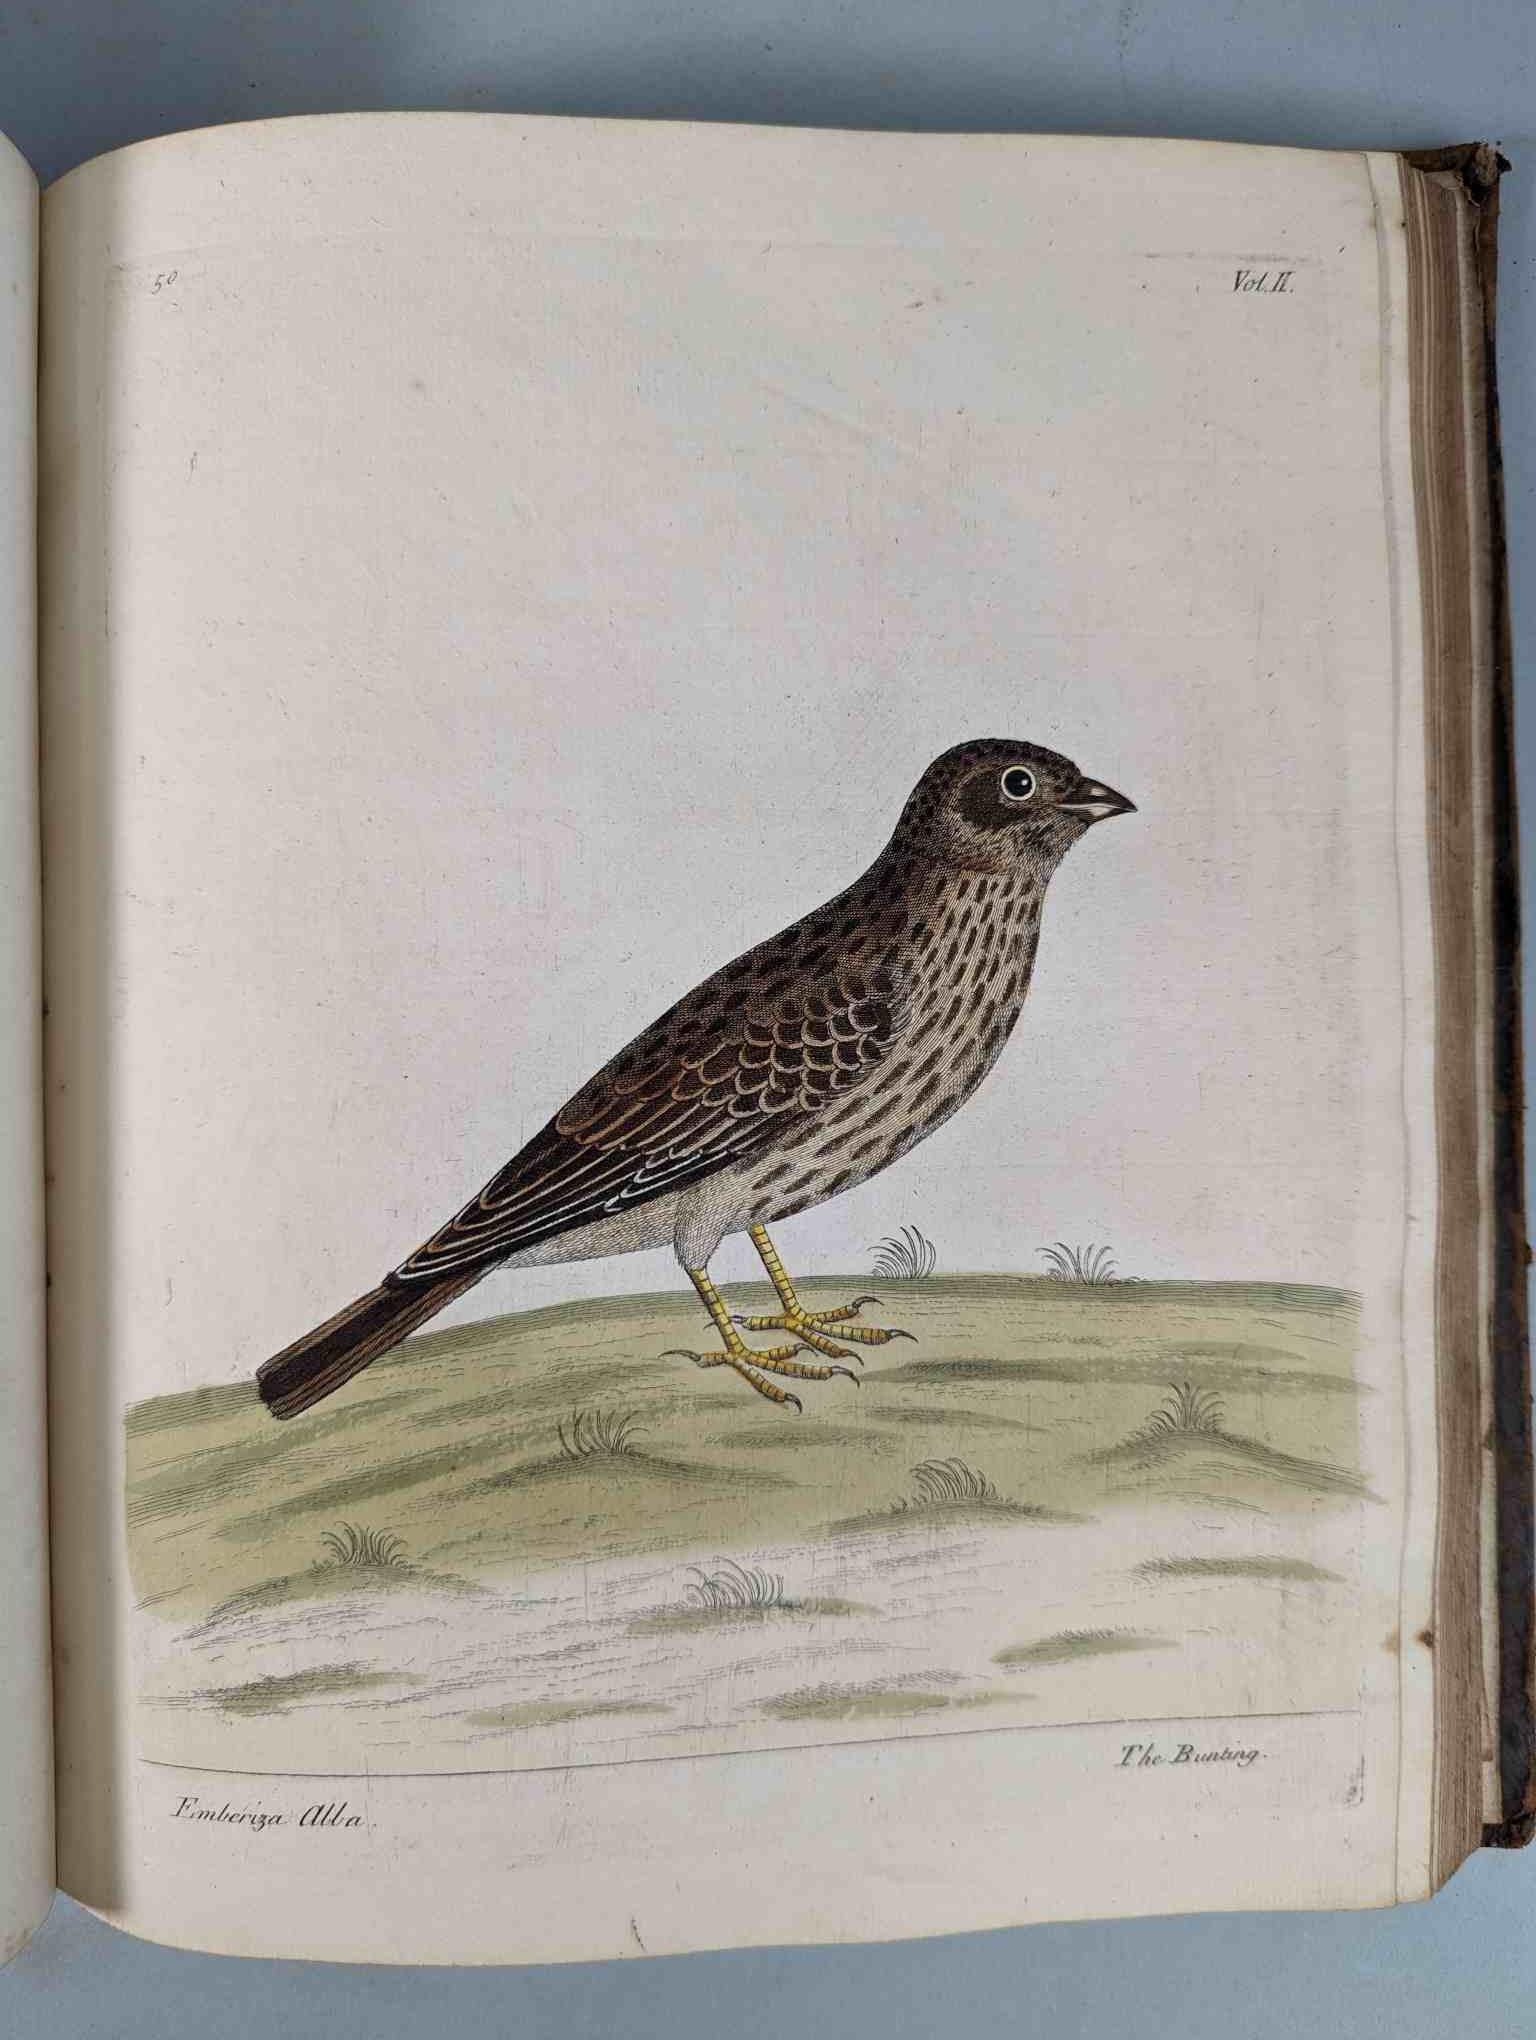 ALBIN, Eleazar. A Natural History of Birds, to which are added, Notes and Observations by W. - Image 154 of 208